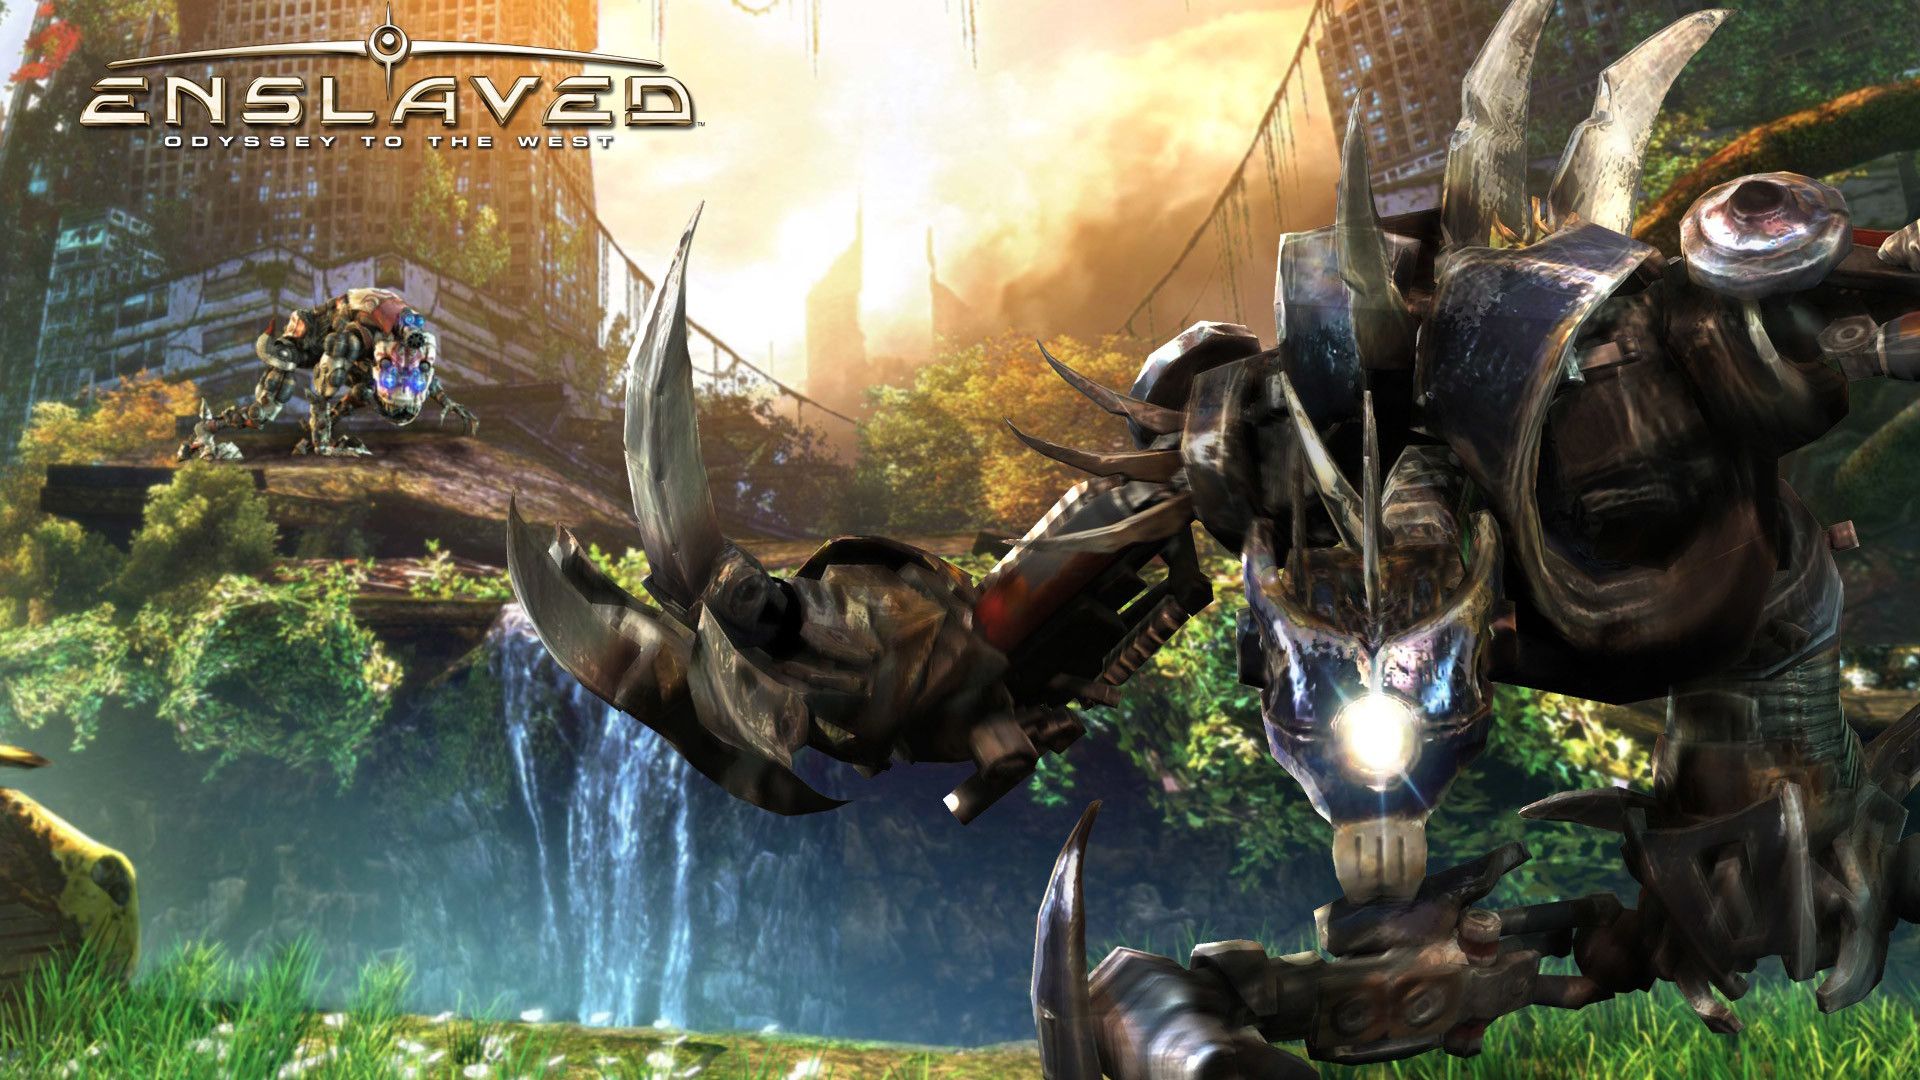 1920x1080 Free Enslaved: Odyssey to the West Wallpaper in 